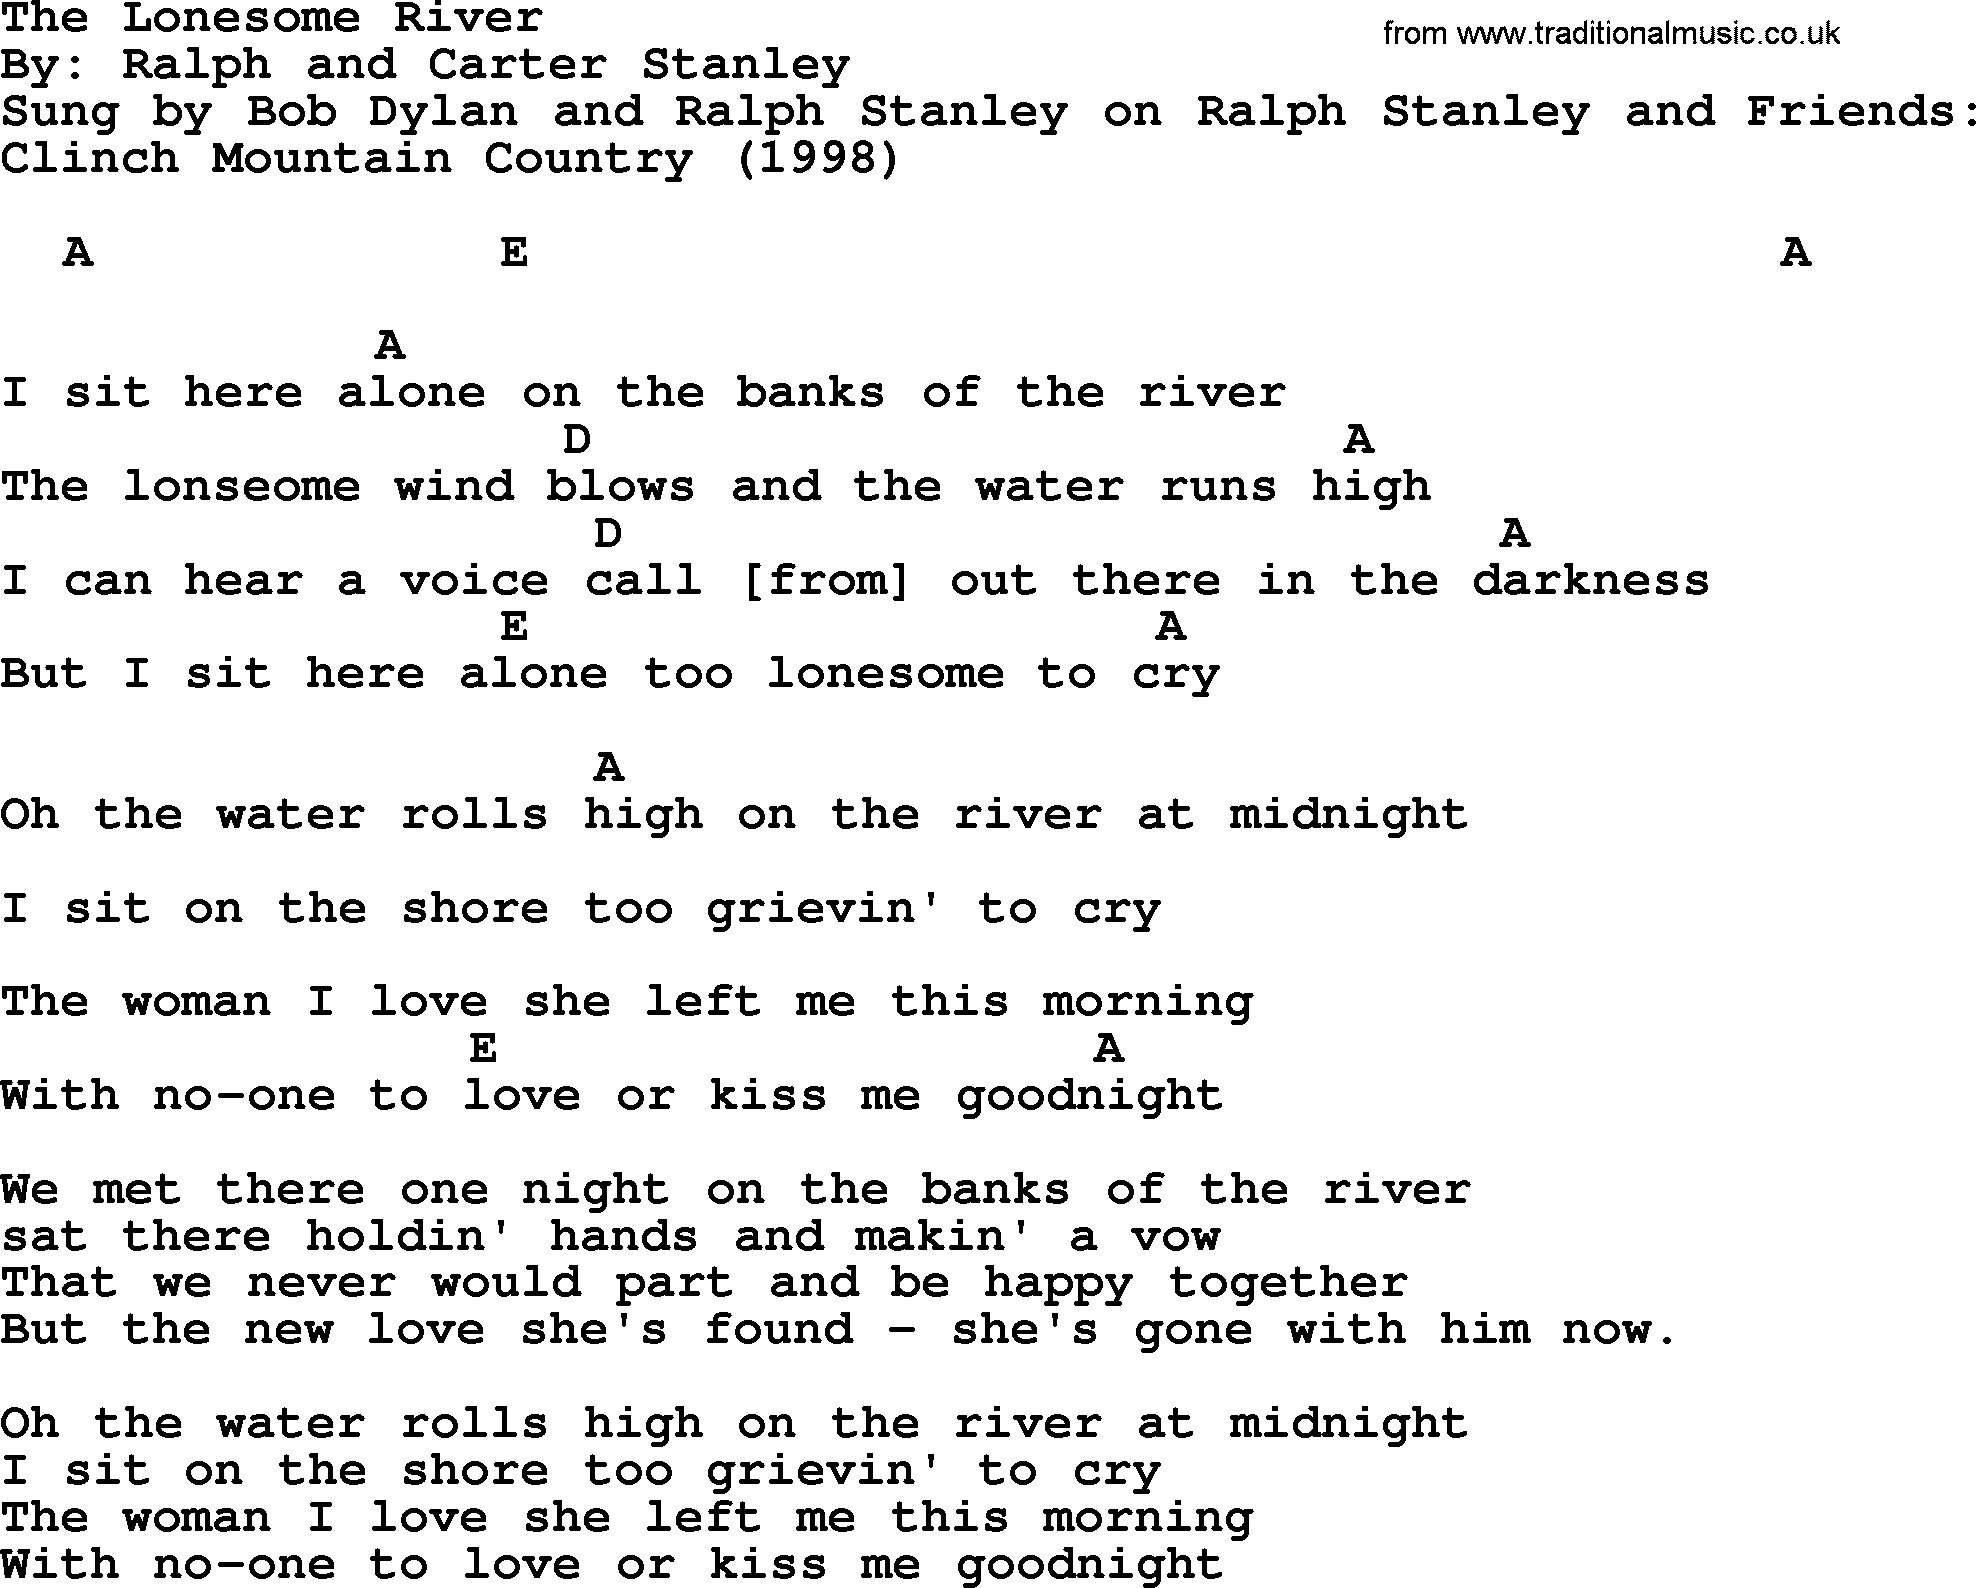 Bob Dylan song, lyrics with chords - The Lonesome River